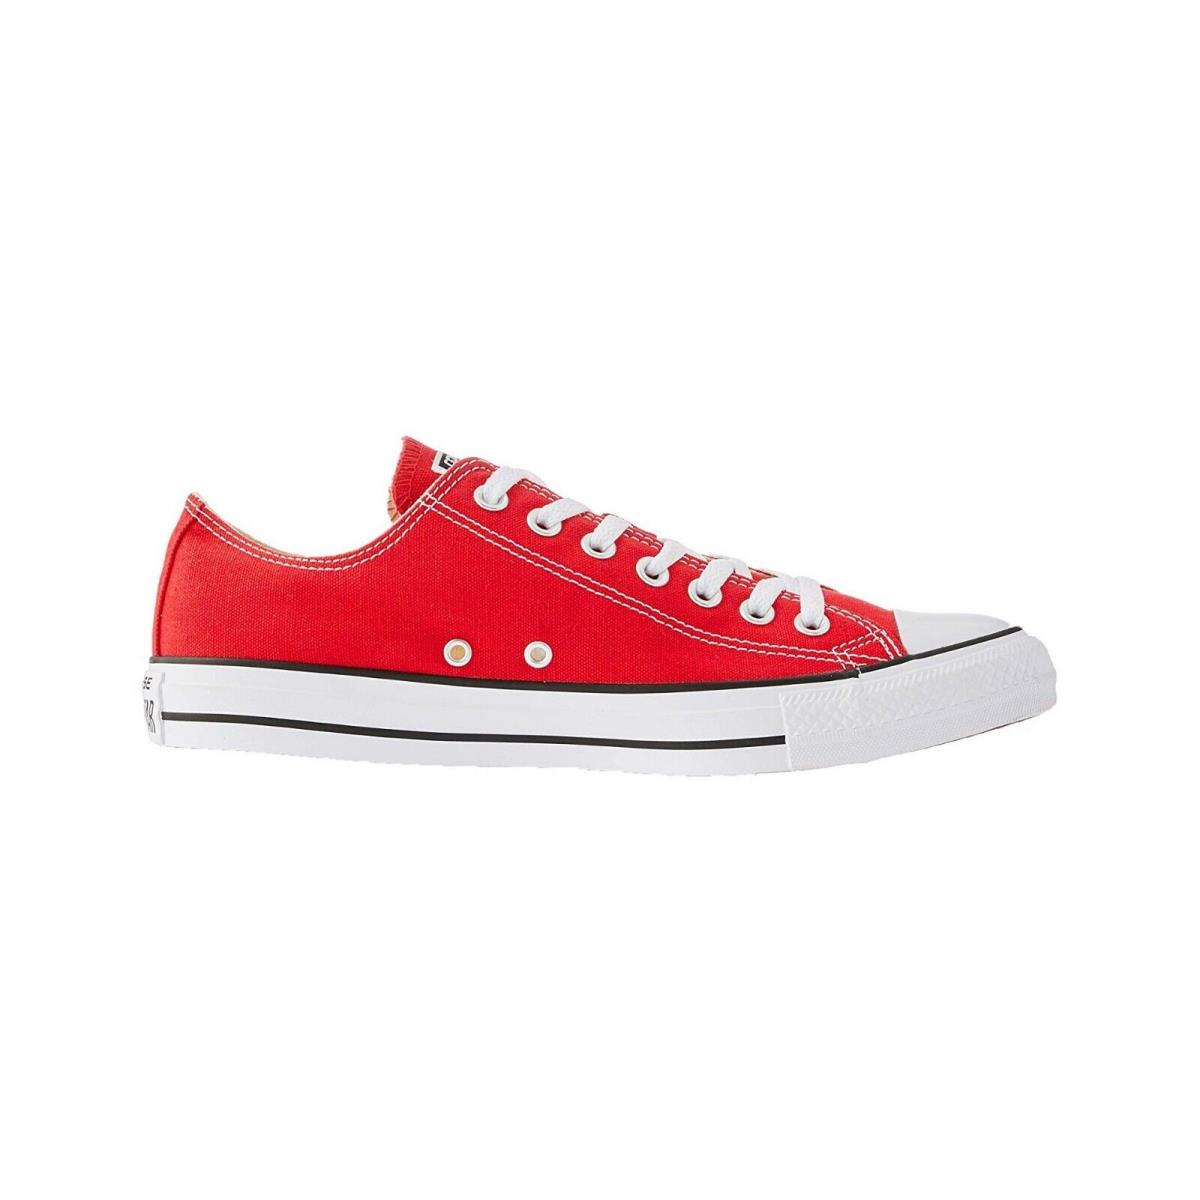 Converse Chuck Taylor All Star Low Top Shoes Sneakers M9696 - Red/white - Red